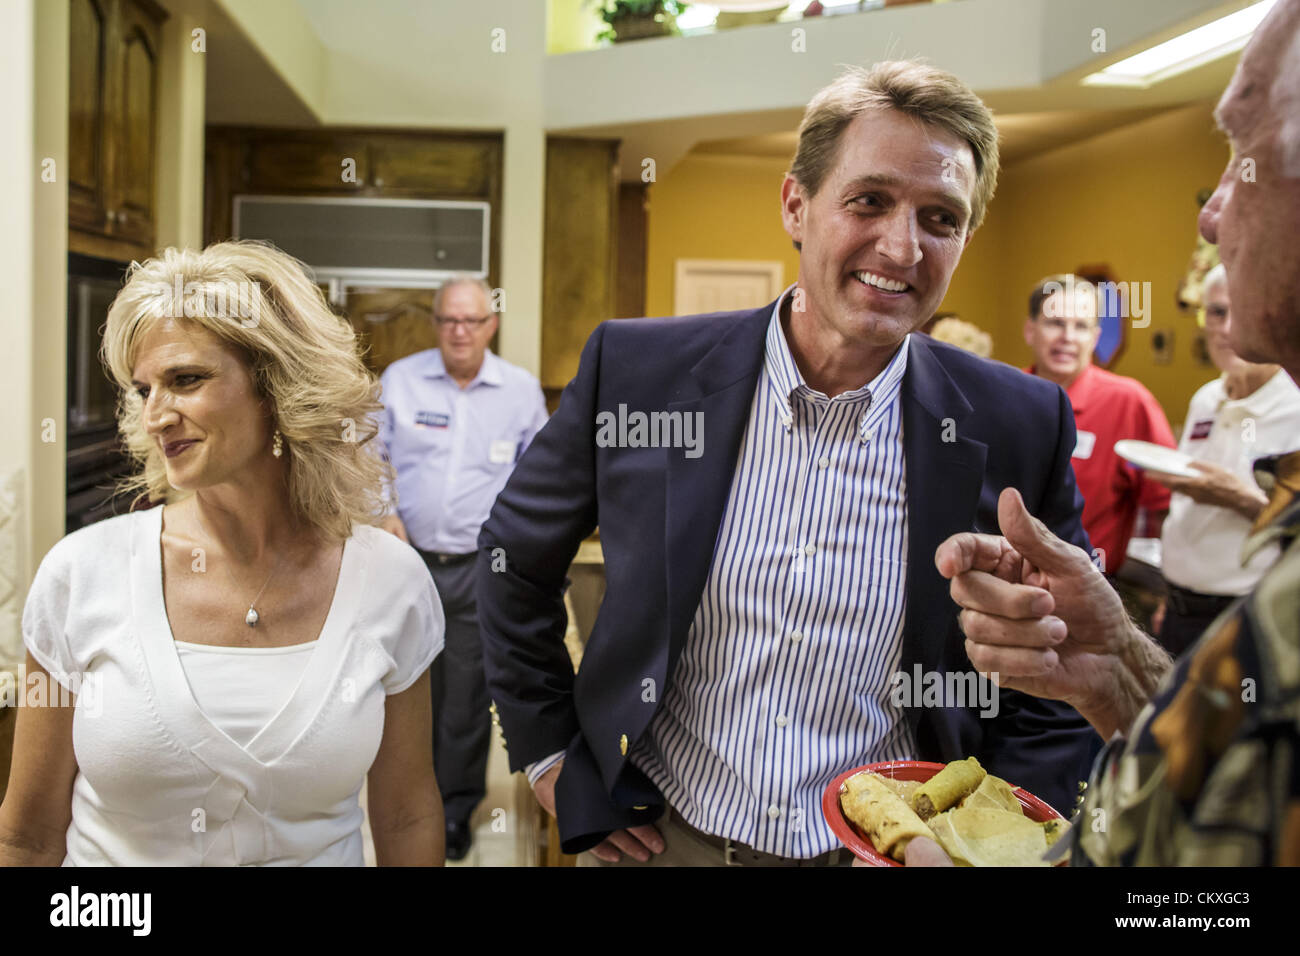 Mesa, Arizona, U.S. Aug. 28, 2012. Congressman JEFF FLAKE and his wife, CHERYL FLAKE, talk to supporters in their Mesa, AZ, home on election night. Flake is the incumbent Congressman from Arizona's 6th Congressional District. He won the Republican primary for the US Senate seat being vacated by retiring Senator Jon Kyl. Flake faced Arizona businessman and political newcomers Wil Cardon in the primary and won handily. (Credit Image: © Jack Kurtz/ZUMAPRESS.com) Stock Photo